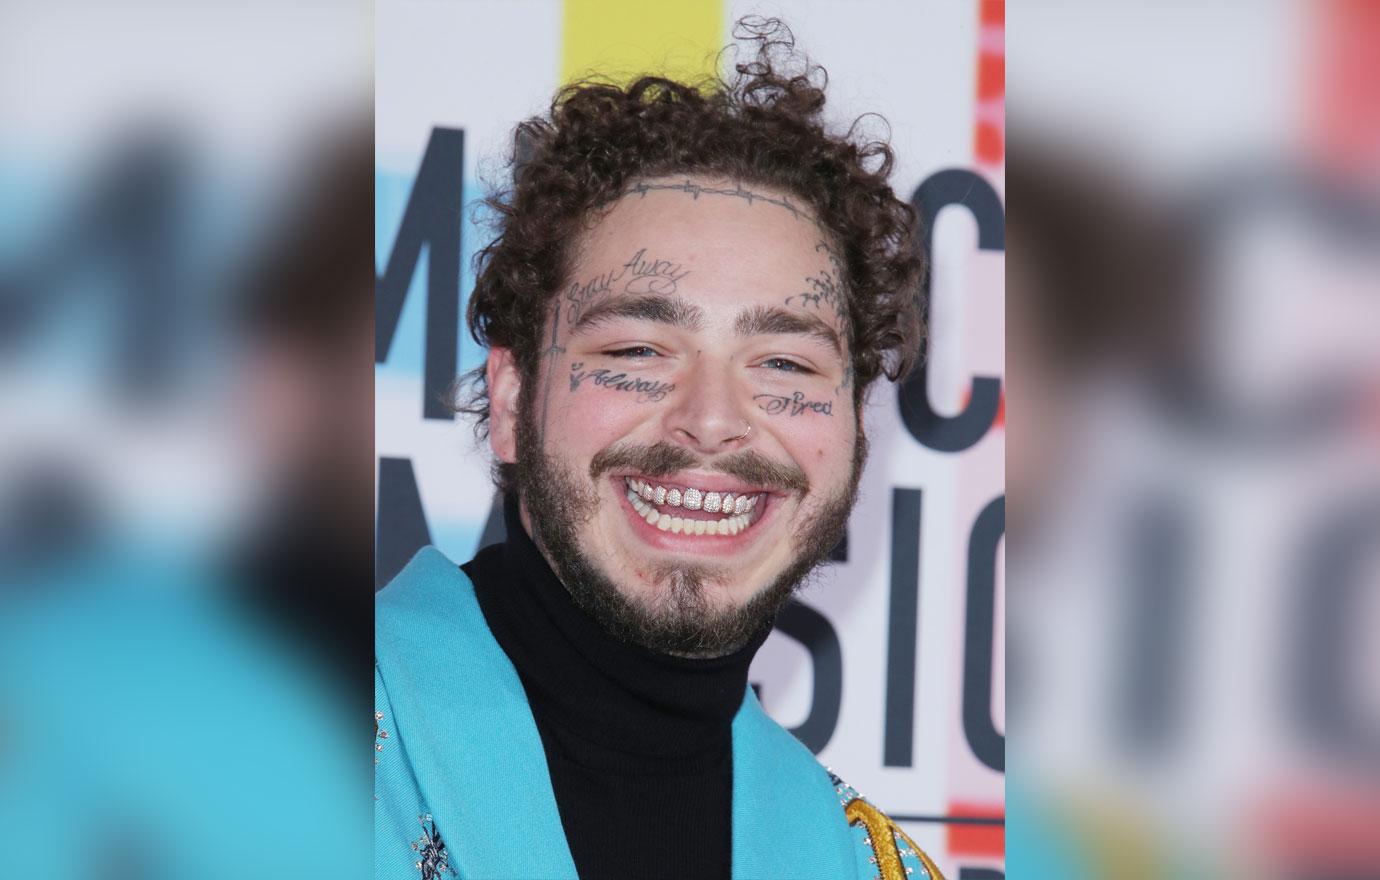 Shania Twain Leaves A Flirty Comment For Post Malone On Instagram